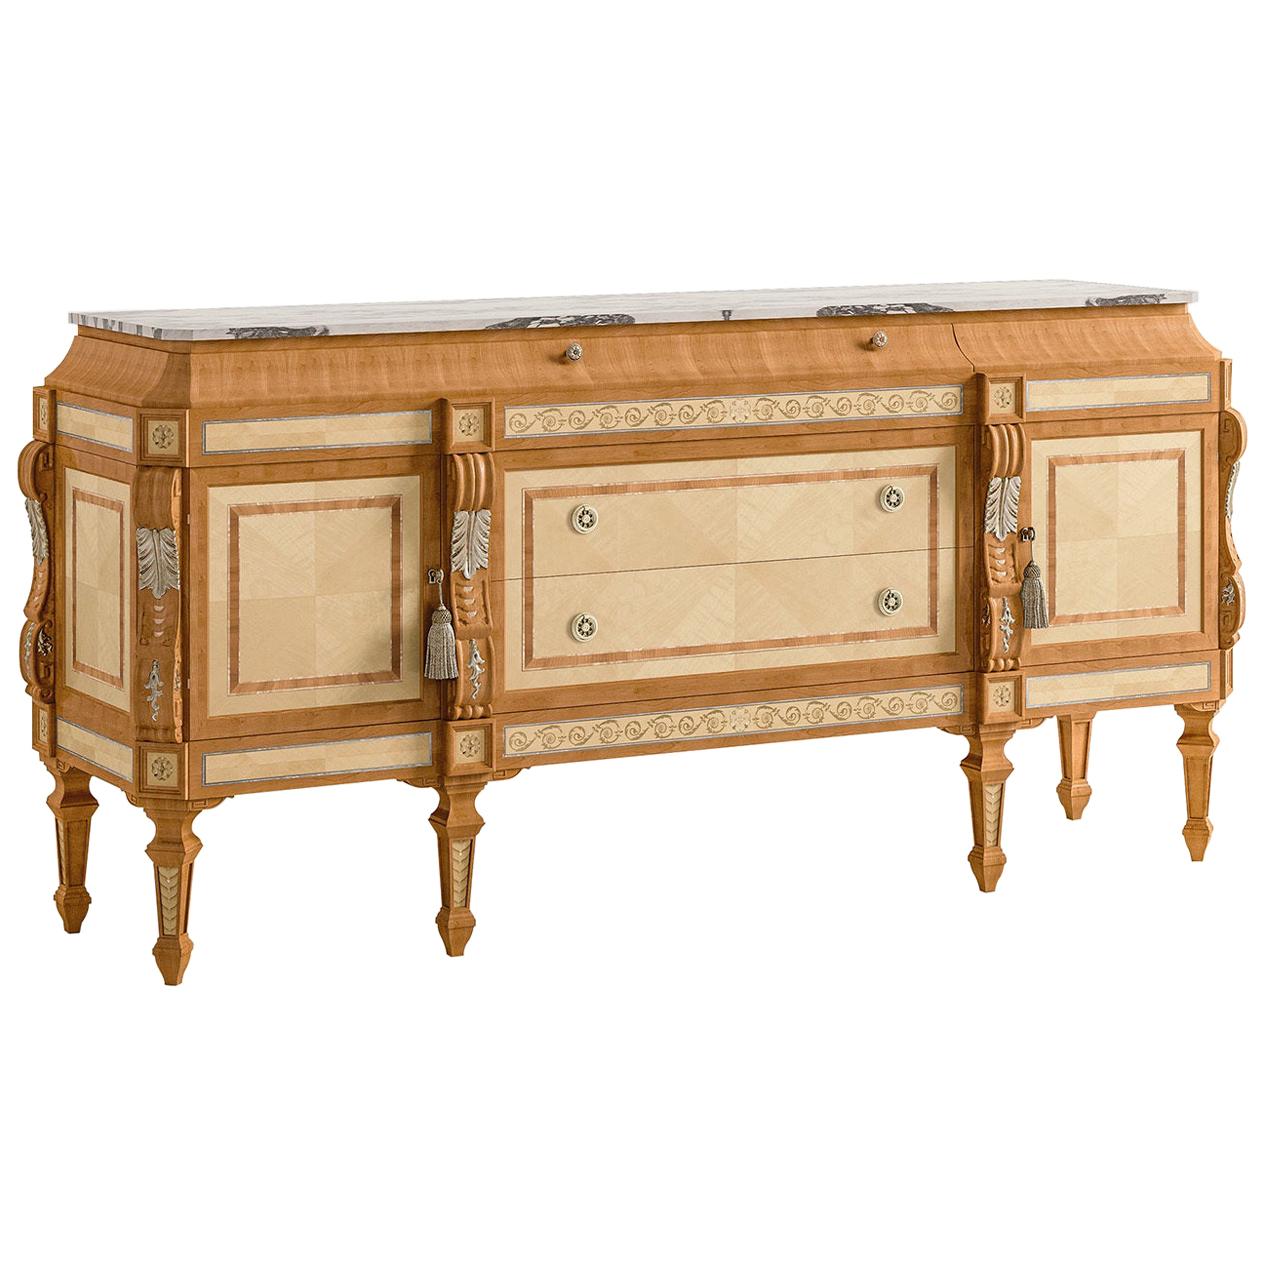 White Maple and Cherry Sideboard with Calacatta Marble Top